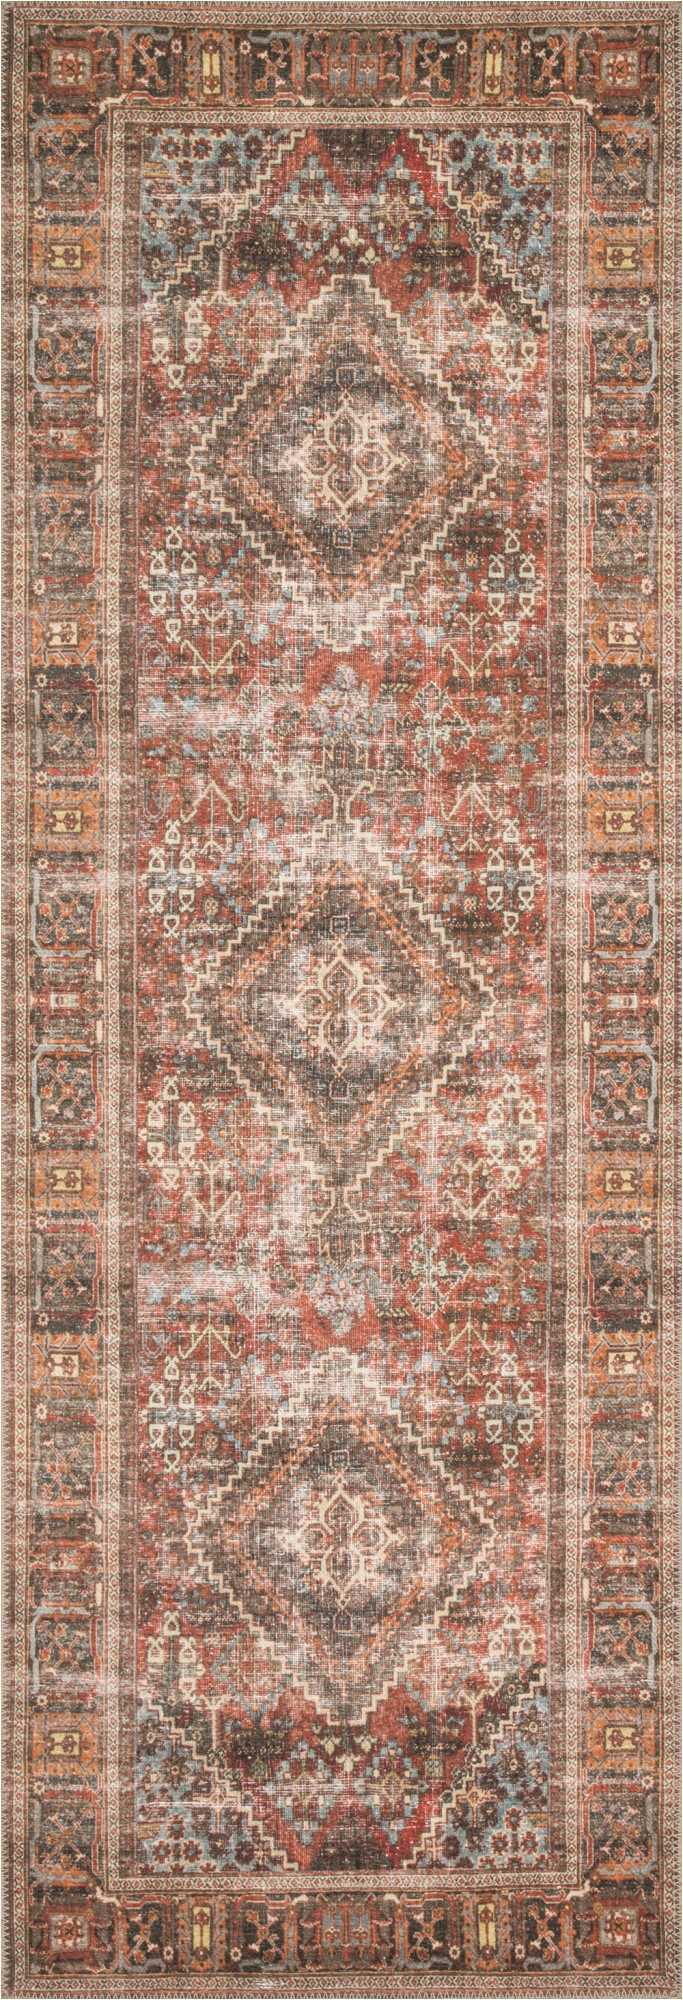 13 by 13 area Rugs Loloi Rugs Loren Printed Lq 13 area Rugs